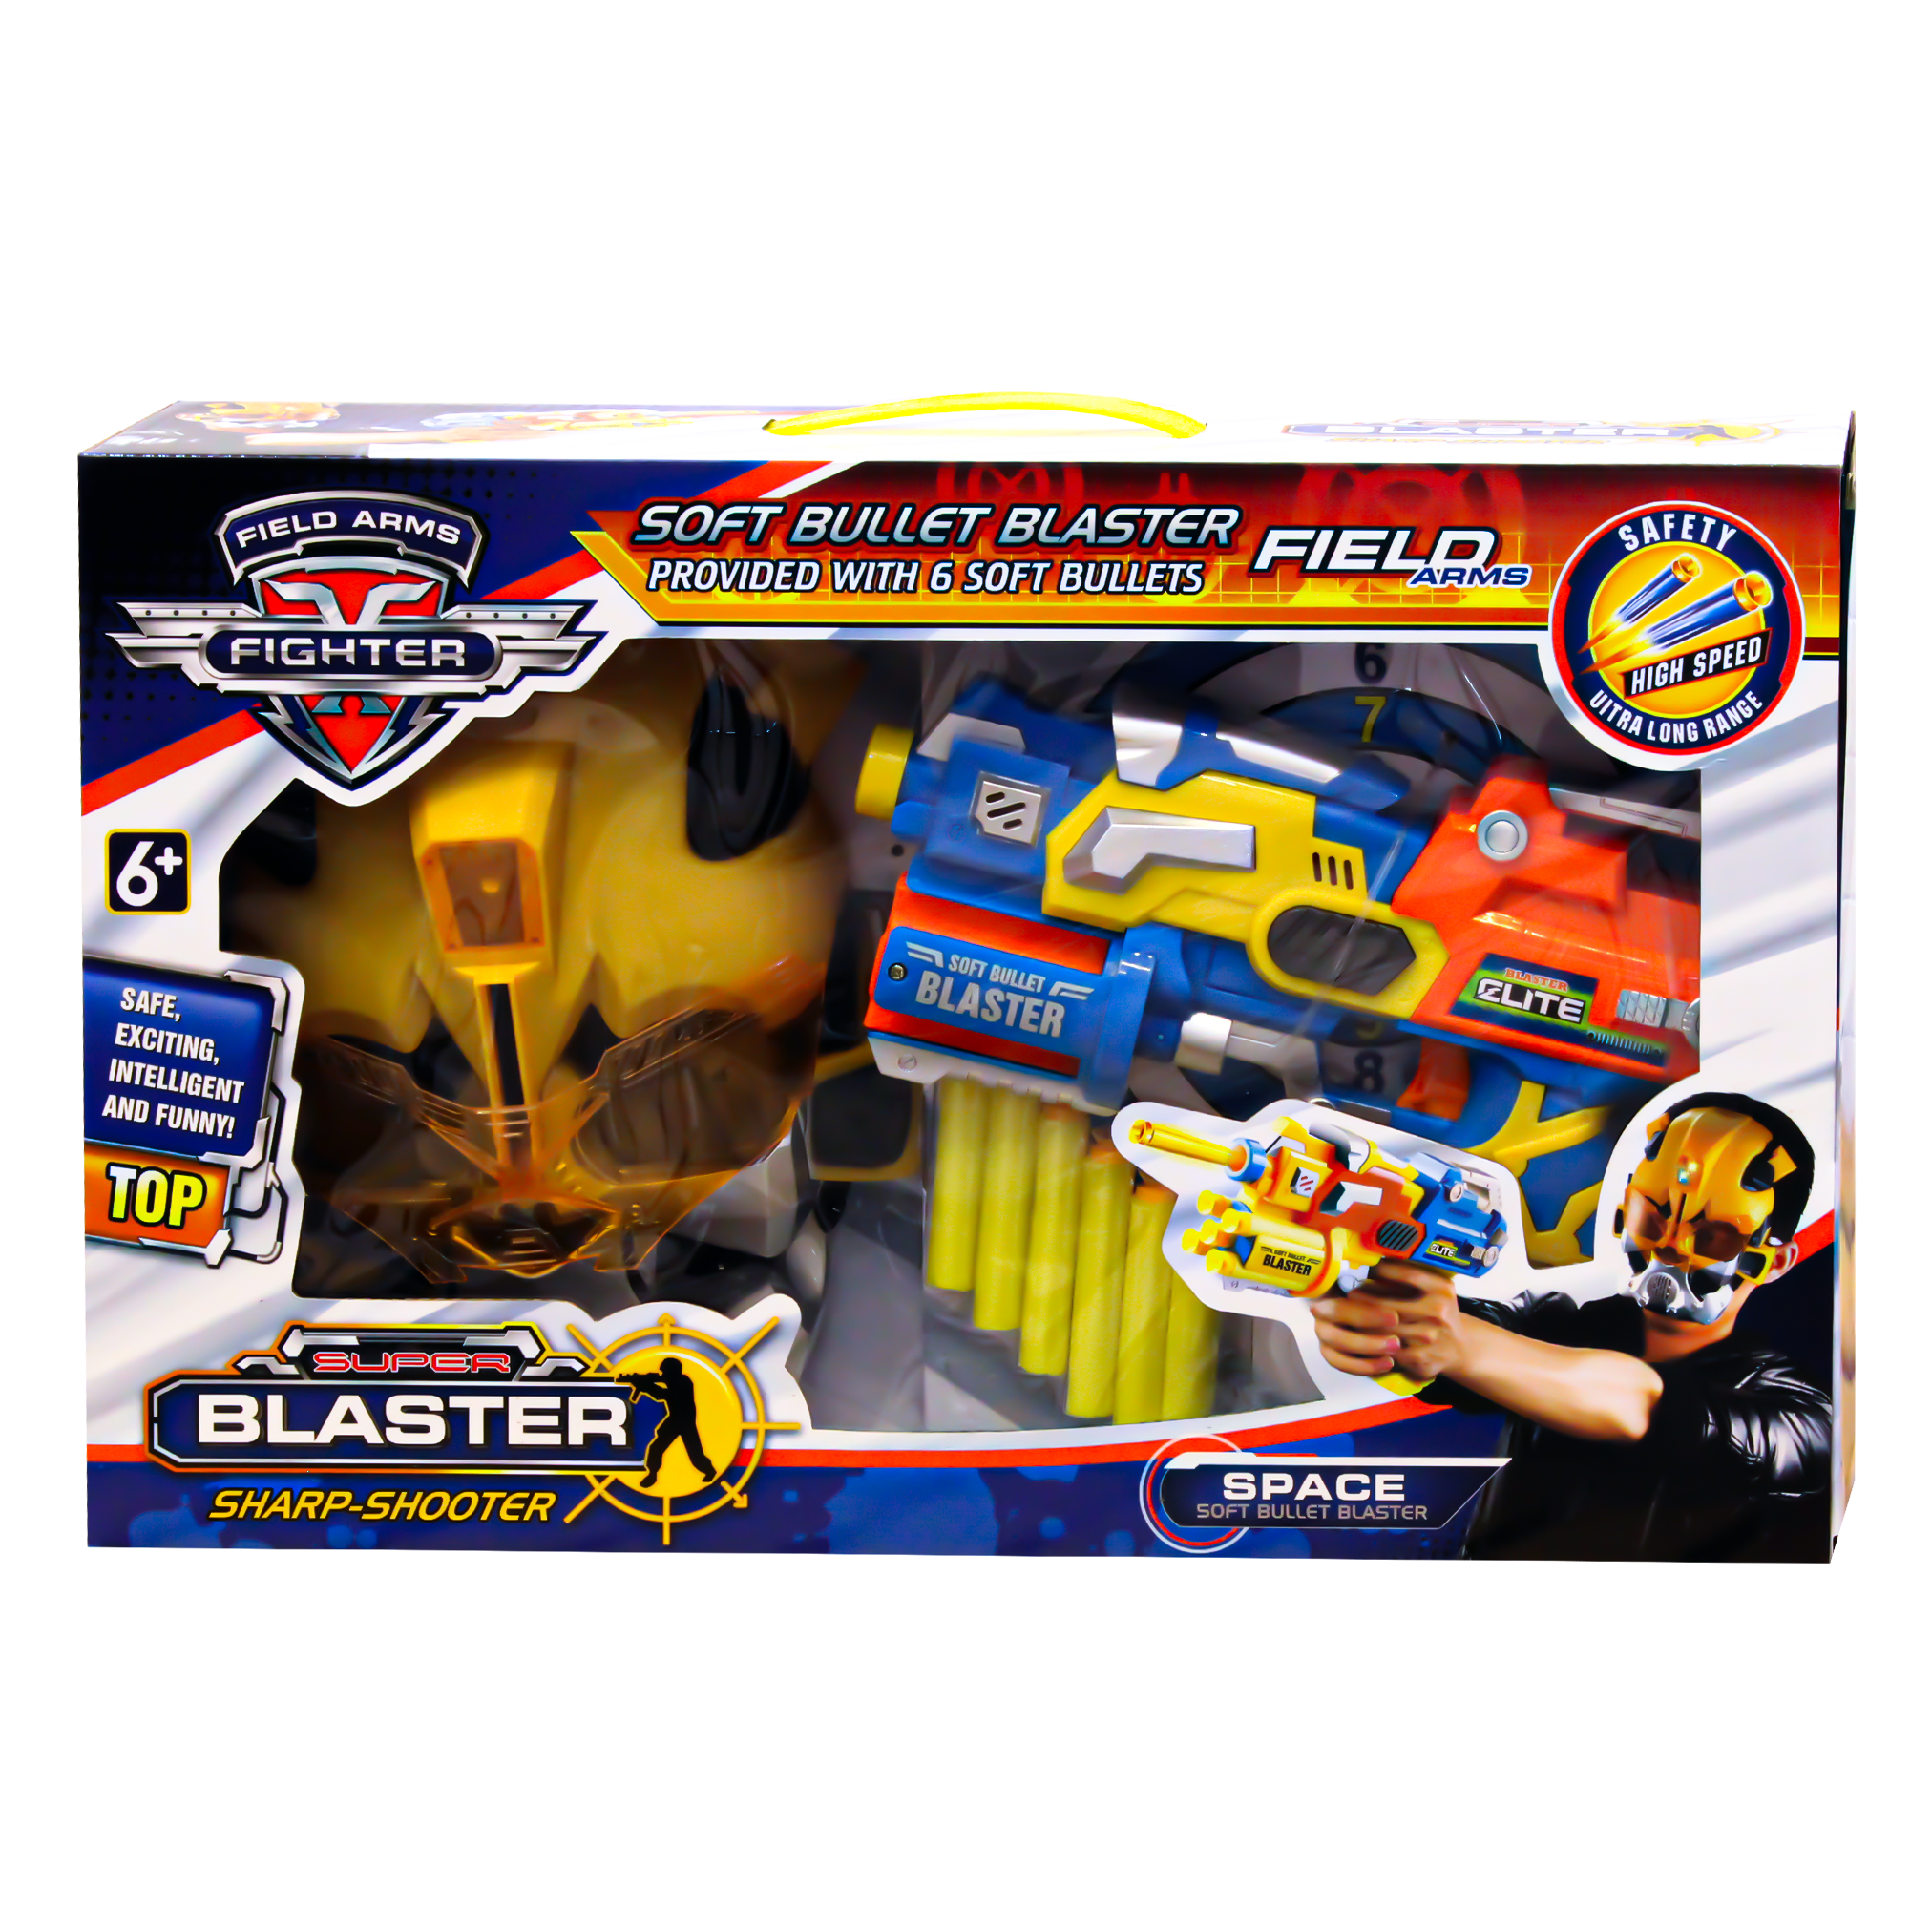 FIELD ARMS FIGHTER SPACE SOFT BULLET BLASTER SHARP SHOOTER WITH FACE MASK Guns & Darts